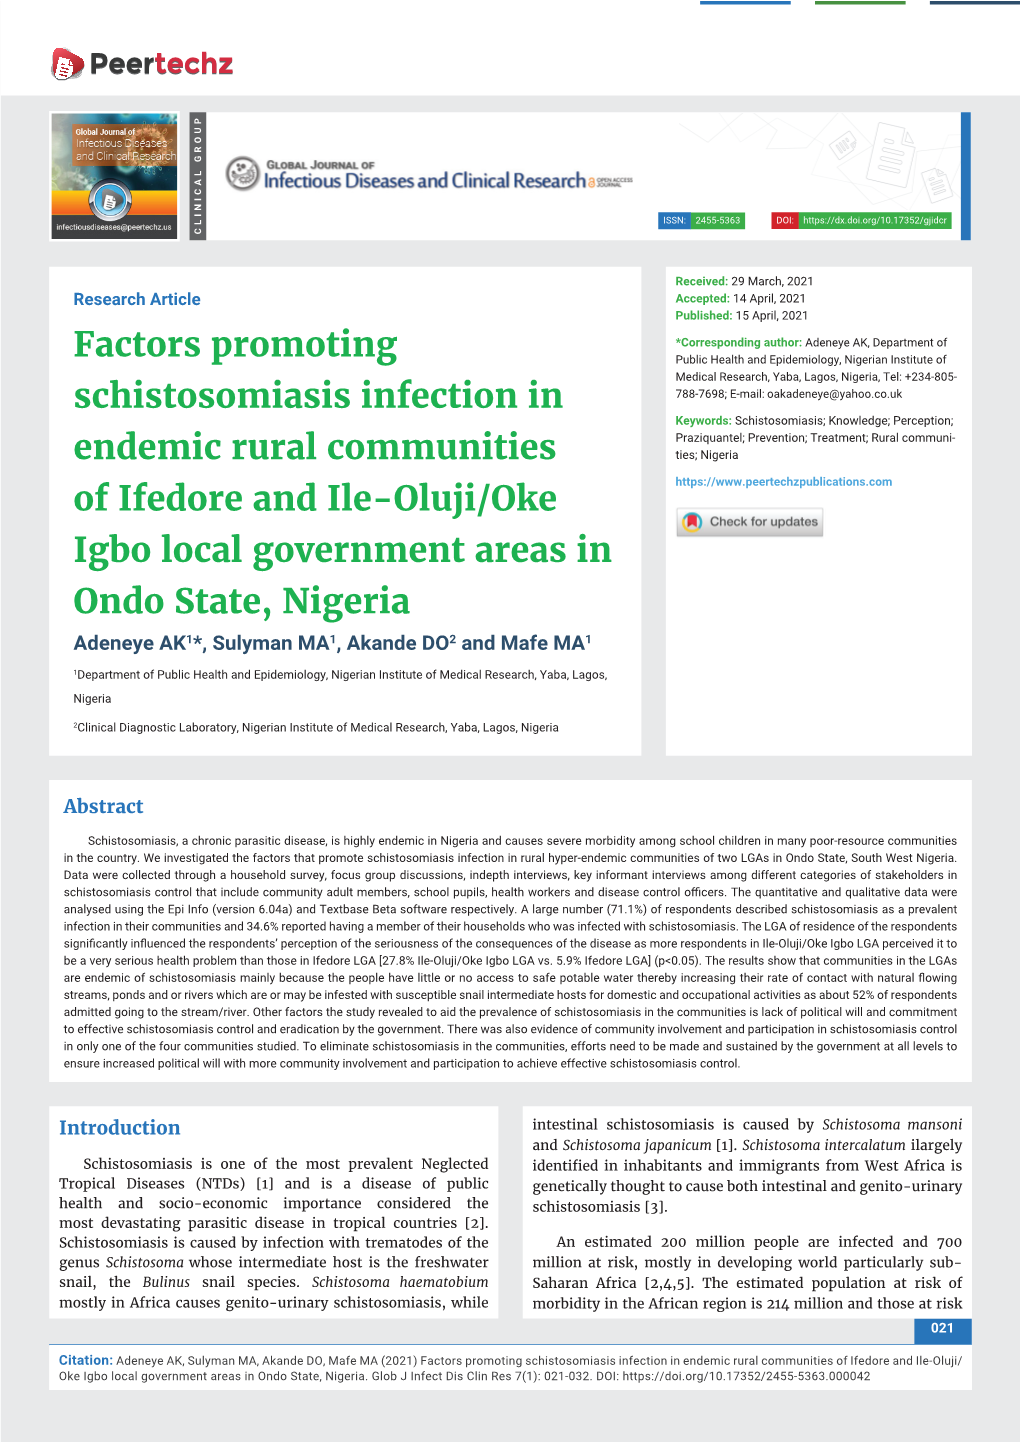 Factors Promoting Schistosomiasis Infection in Endemic Rural Communities of Ifedore and Ile-Oluji/ Oke Igbo Local Government Areas in Ondo State, Nigeria